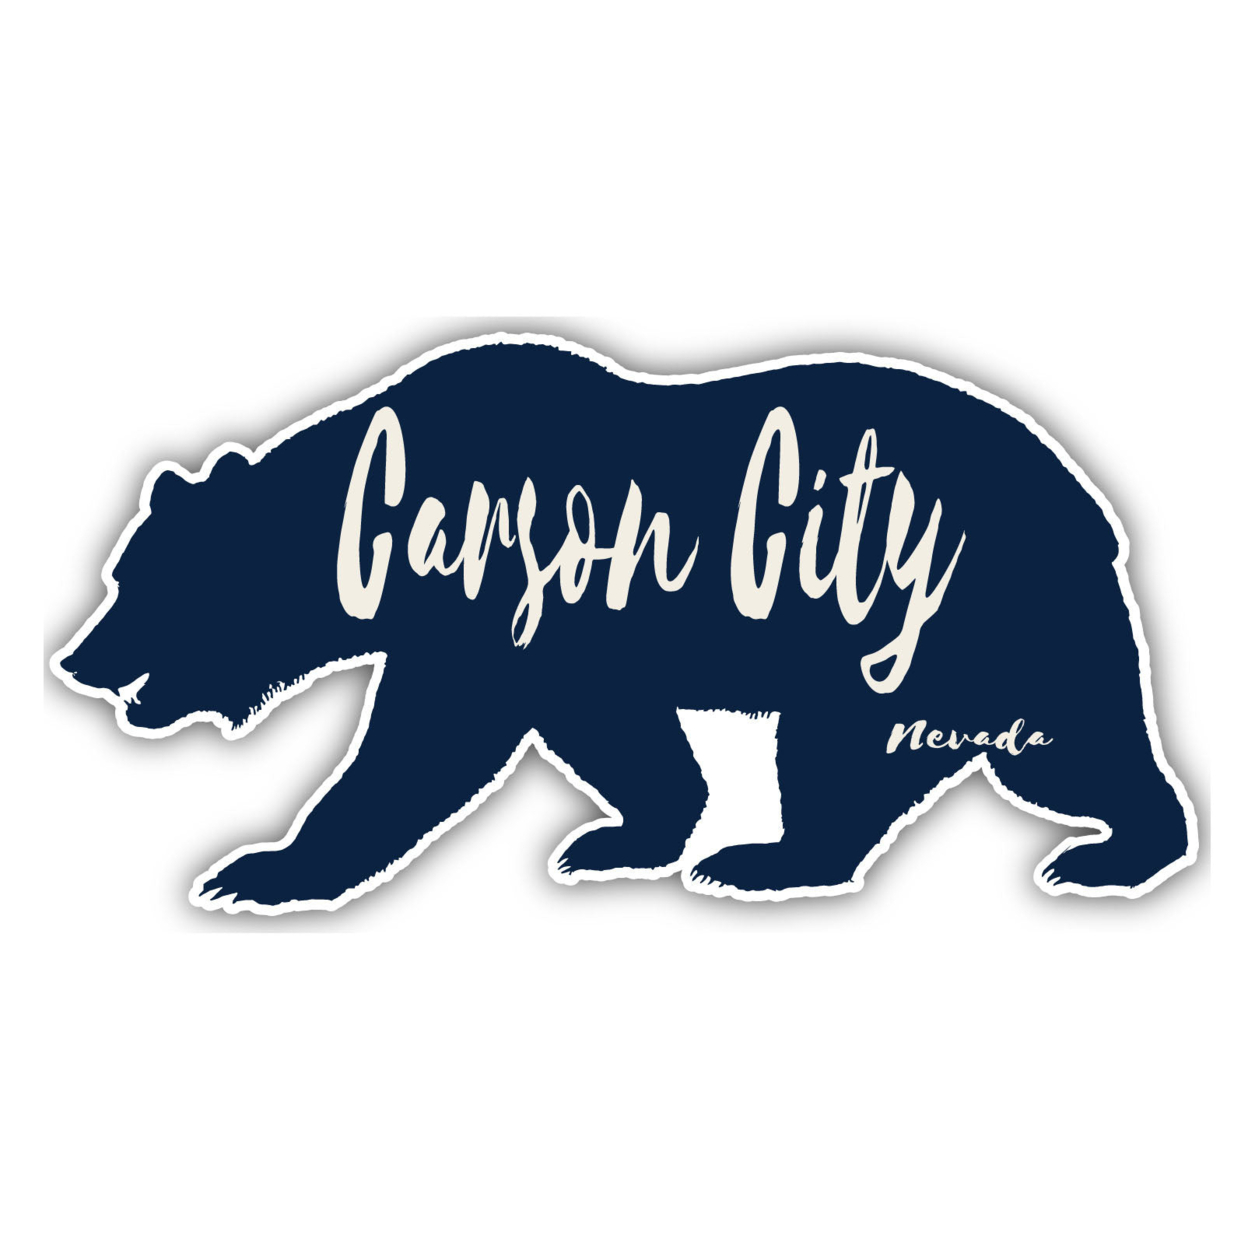 Carson City Nevada Souvenir Decorative Stickers (Choose Theme And Size) - 4-Pack, 2-Inch, Camp Life